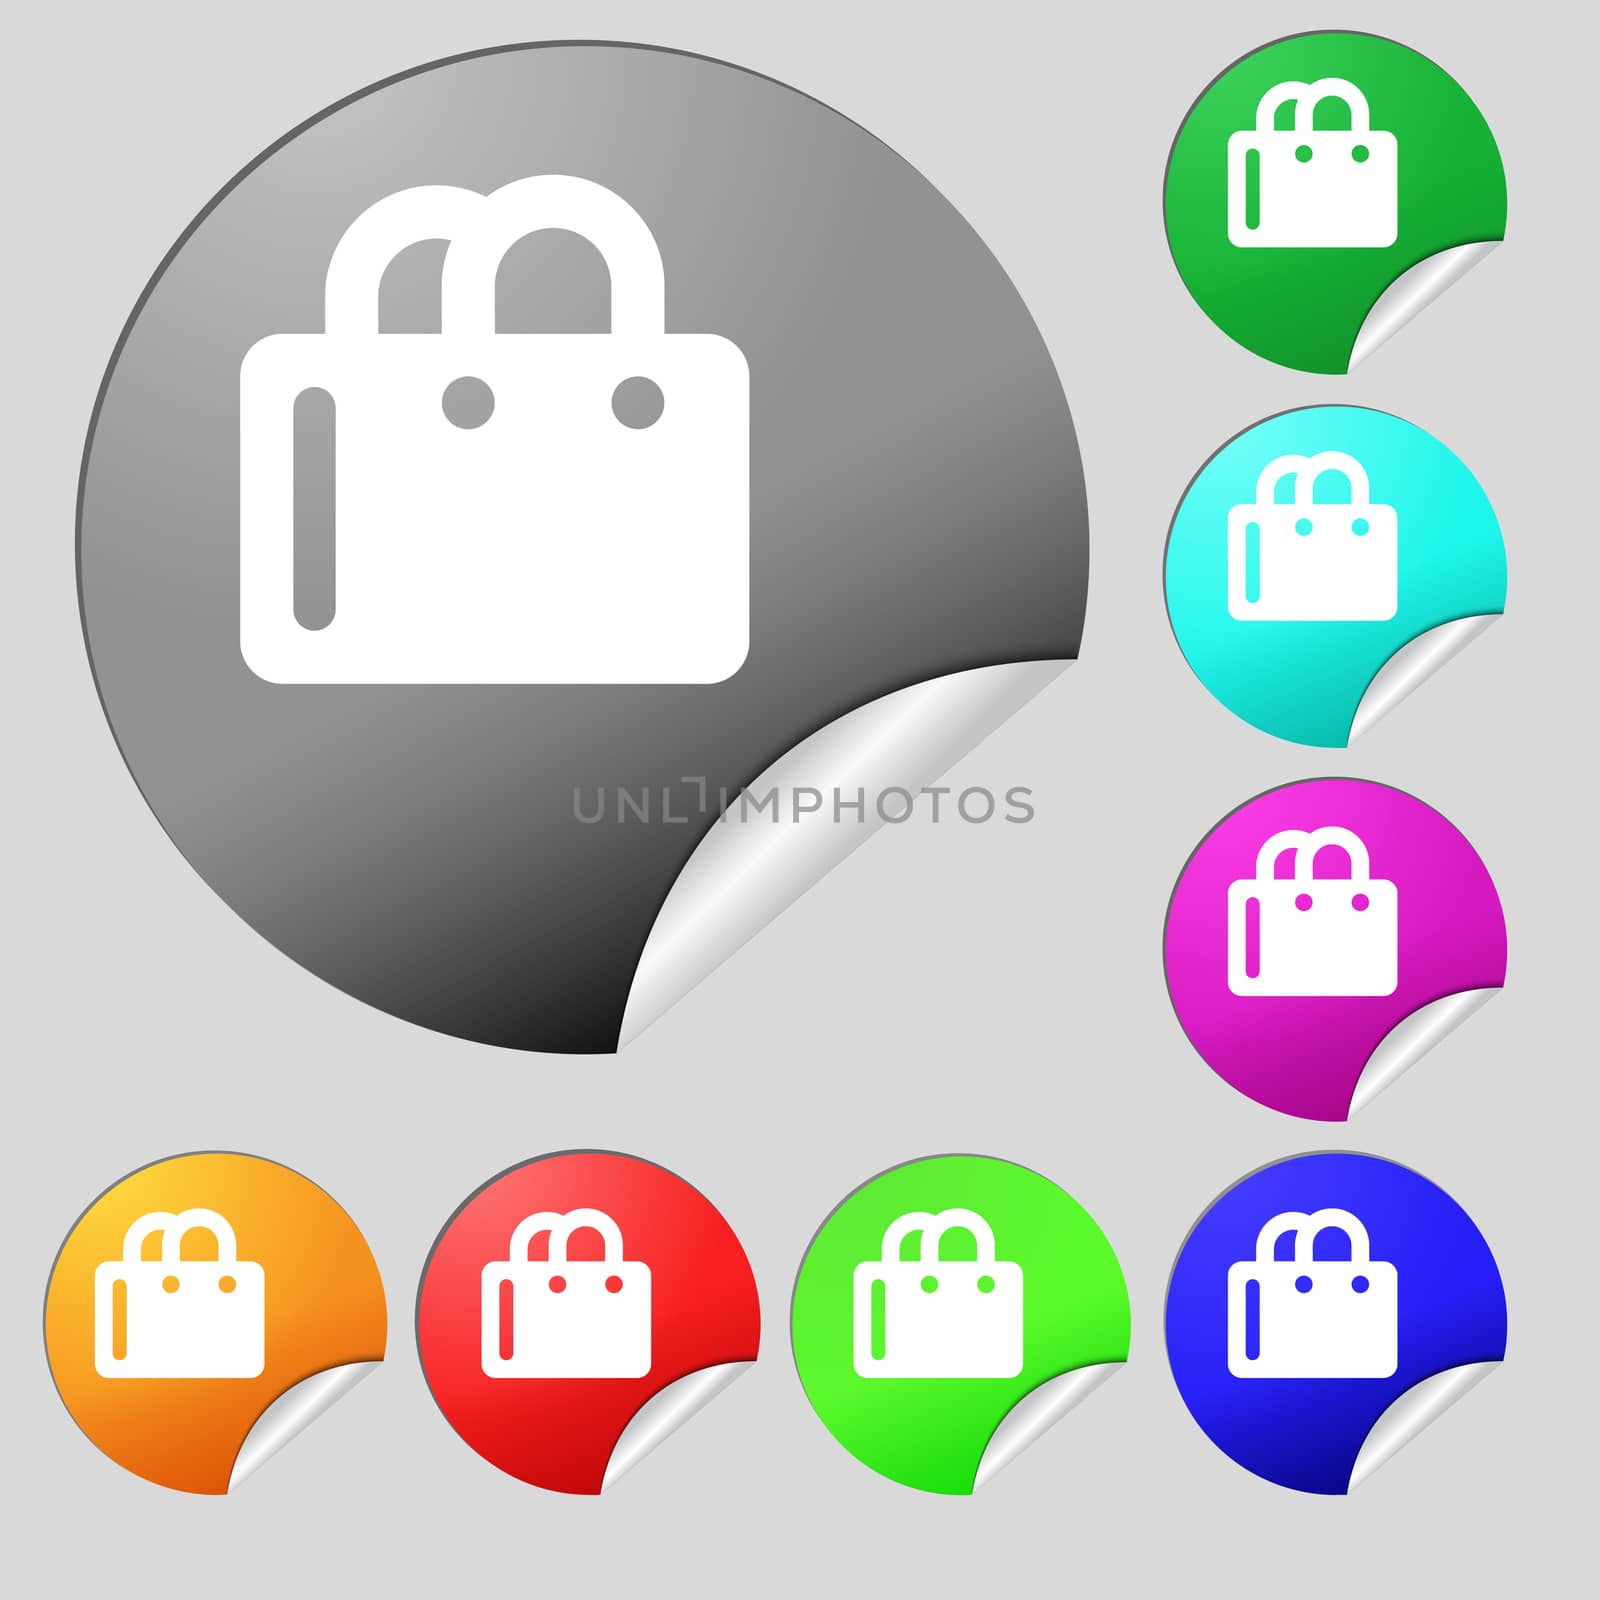 shopping bag icon sign. Set of eight multi colored round buttons, stickers. illustration